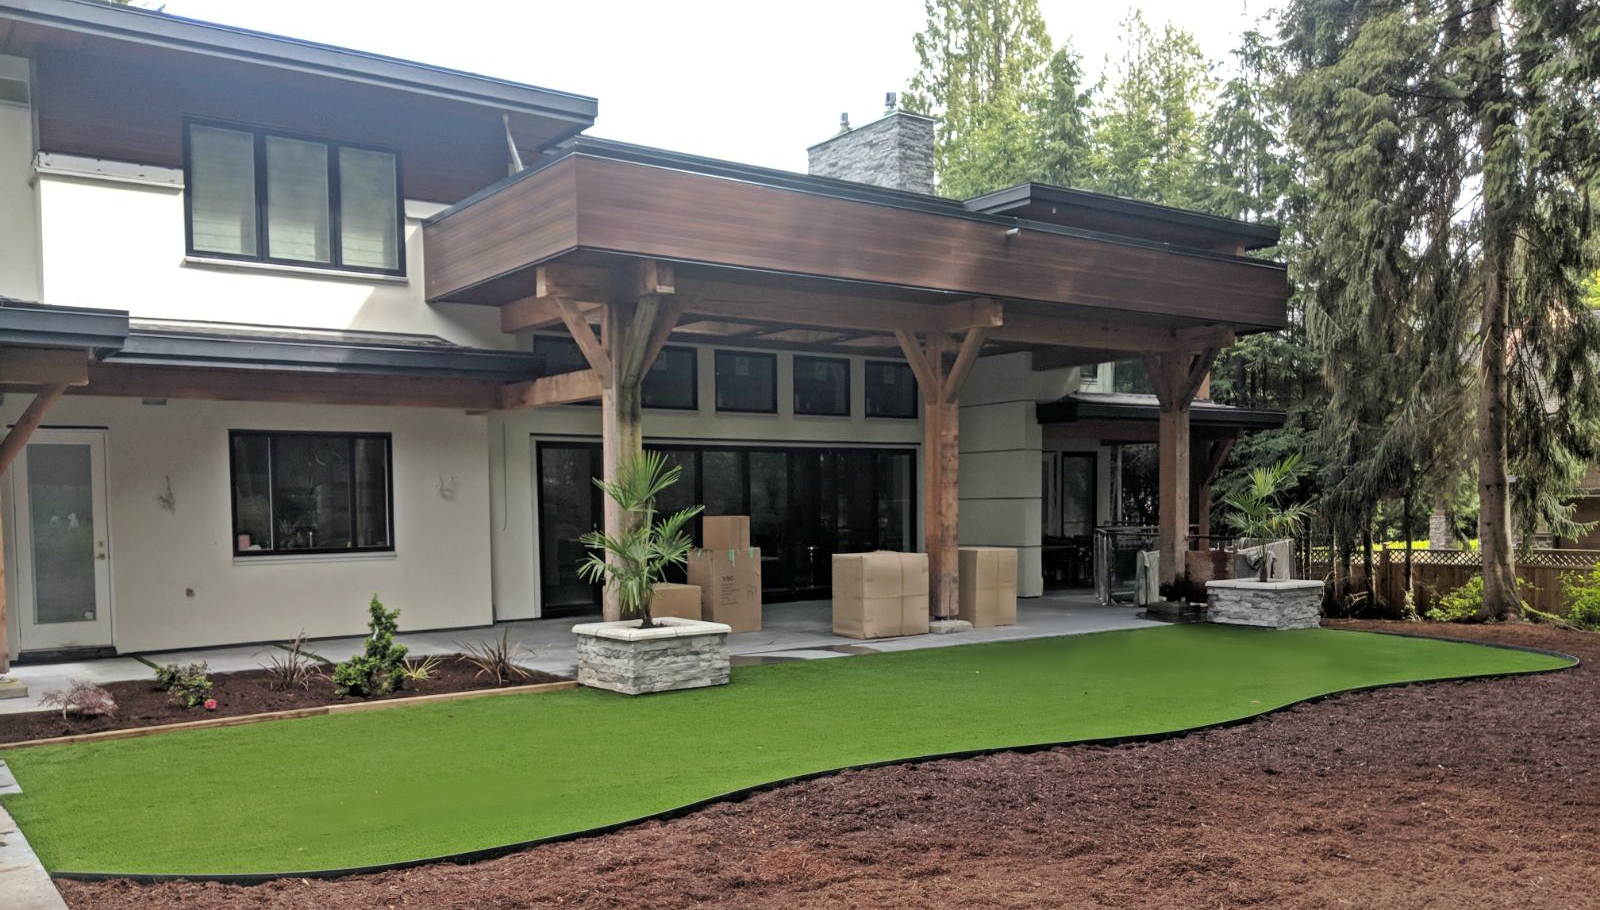 Premium Grass Blades Synthetic Artificial Turf: Evergreen Project-Surrey